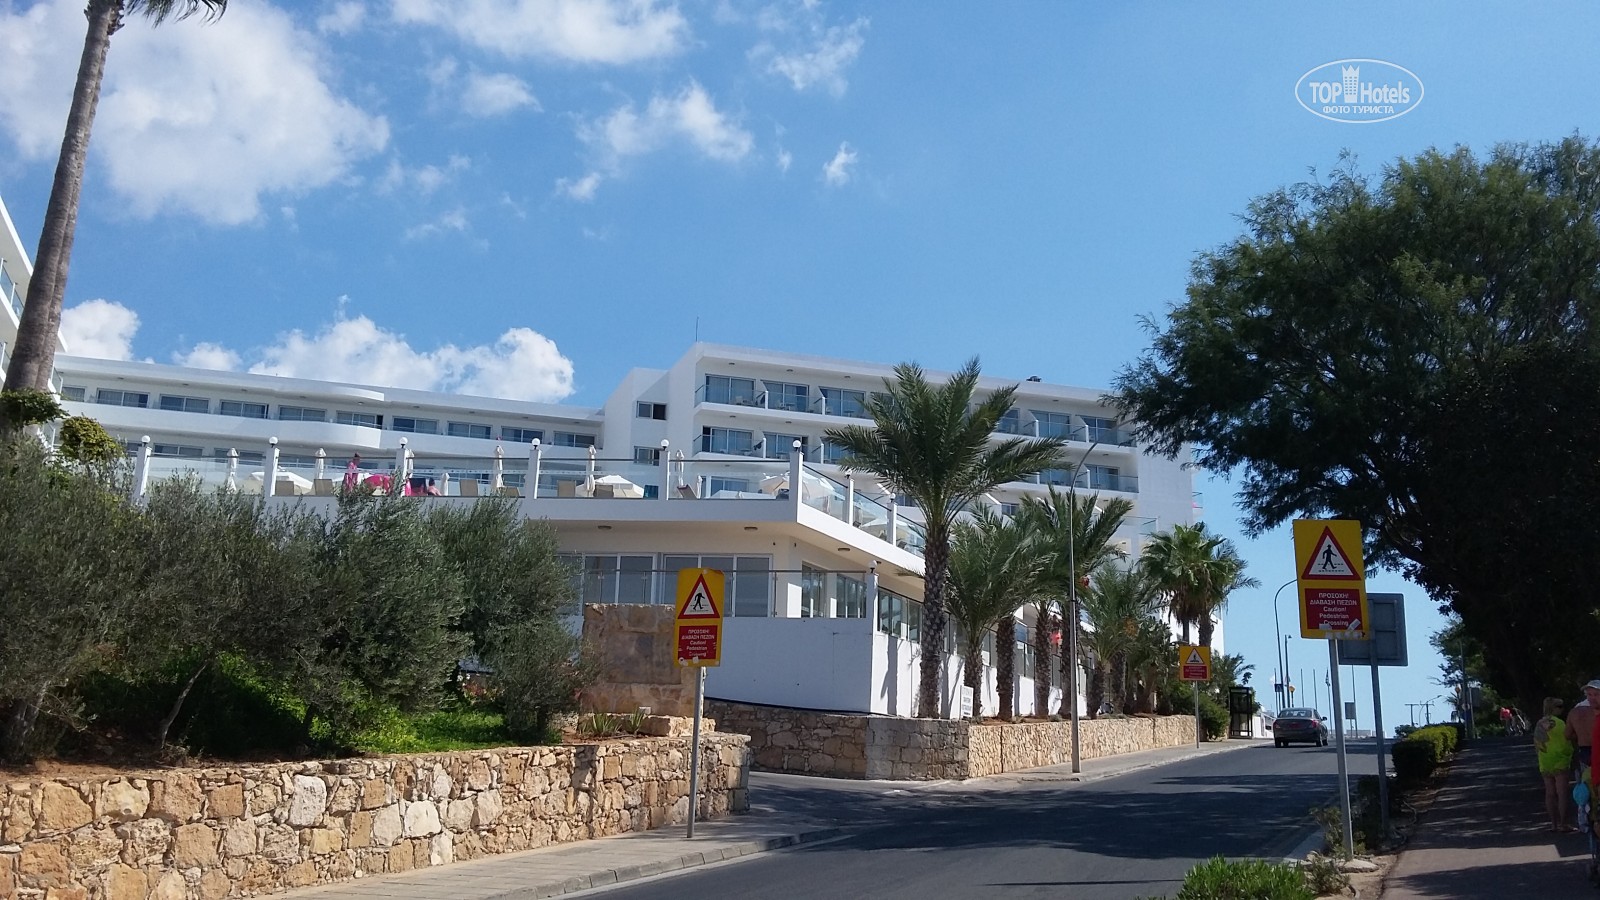 Hot tours in Hotel Tofinis Ayia Napa Cyprus